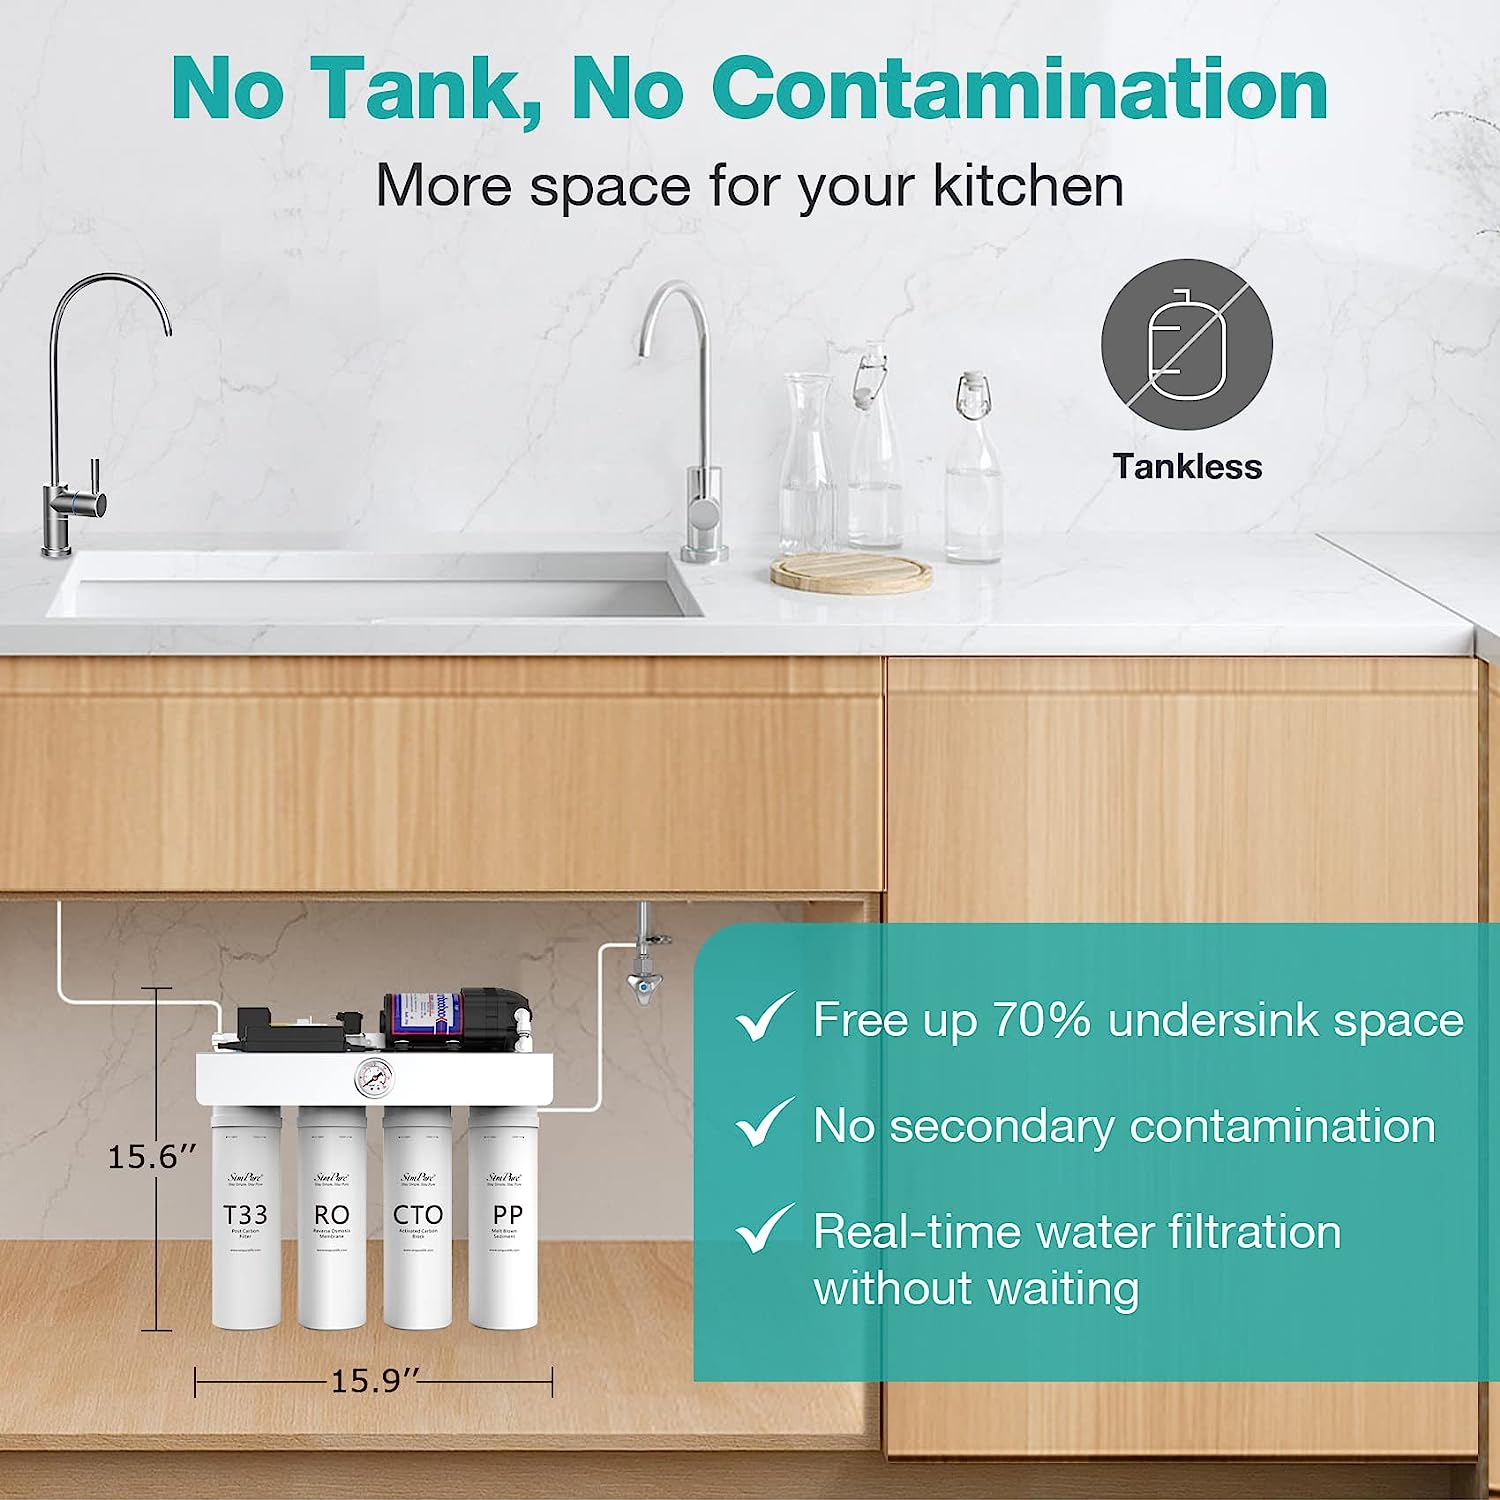 NH Tap Whole Home UV Water Purifier System - NH Tap